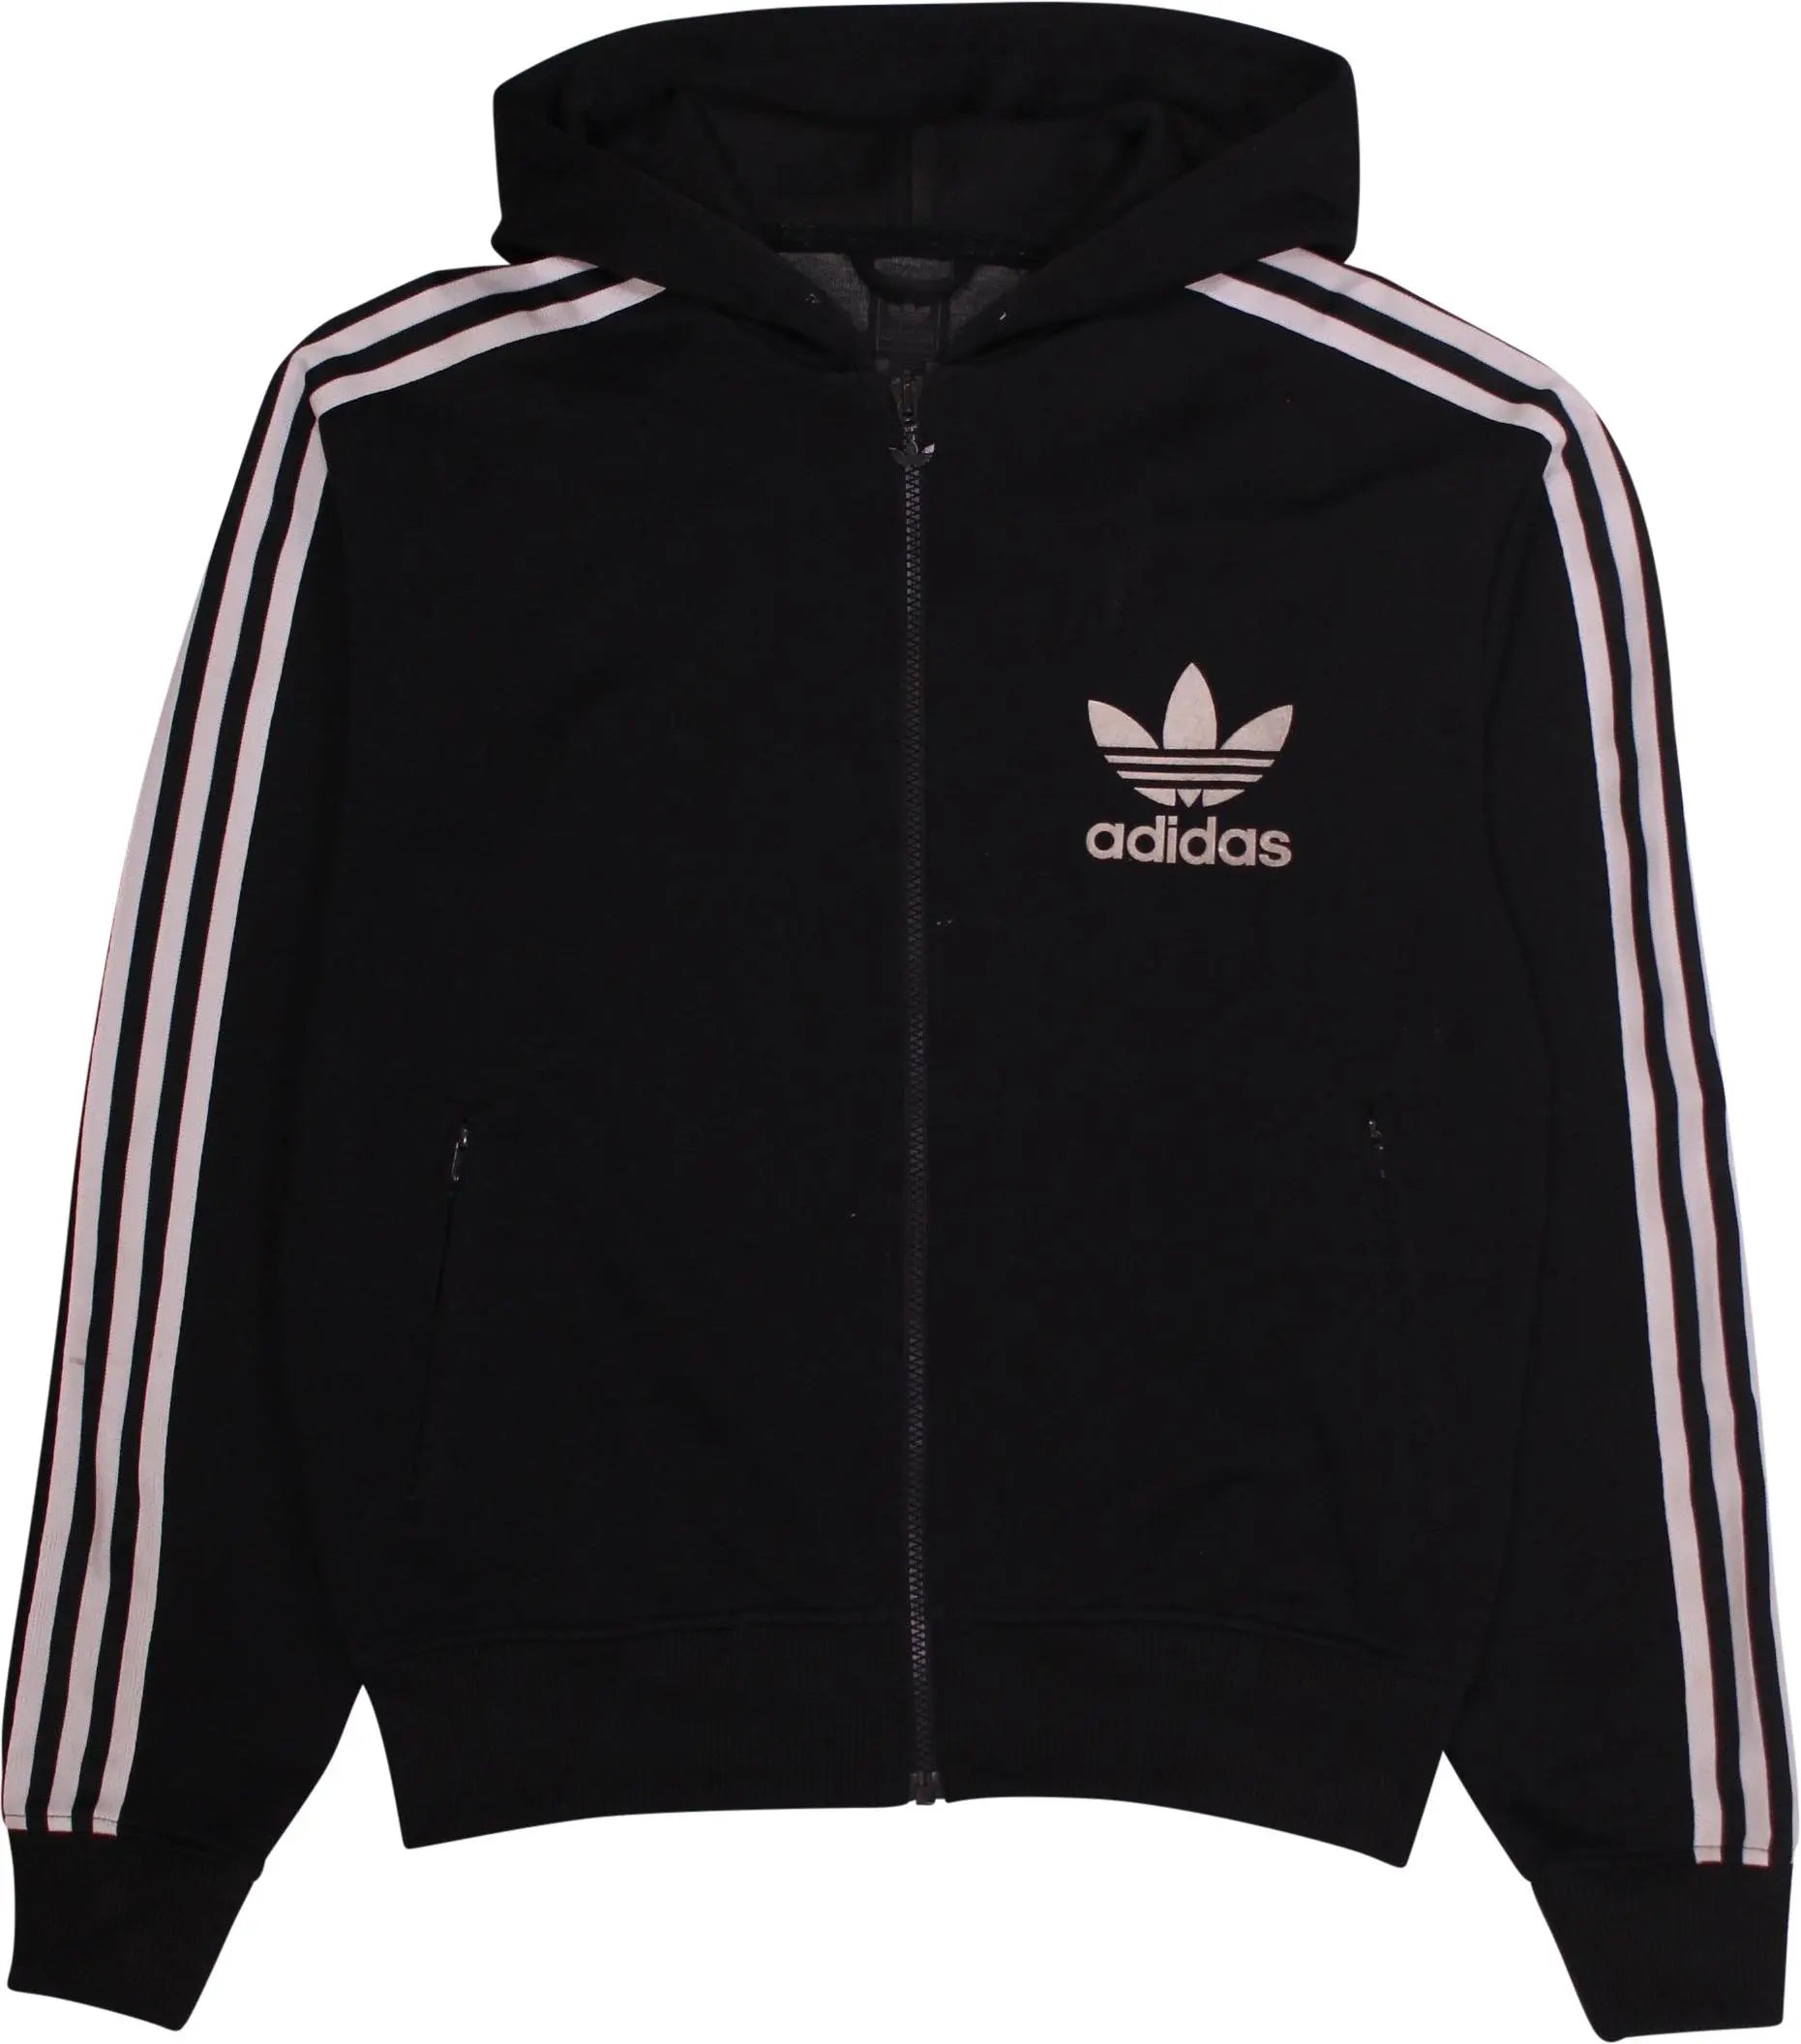 Adidas - Black Hooded Track Jacket by Adidas- ThriftTale.com - Vintage and second handclothing